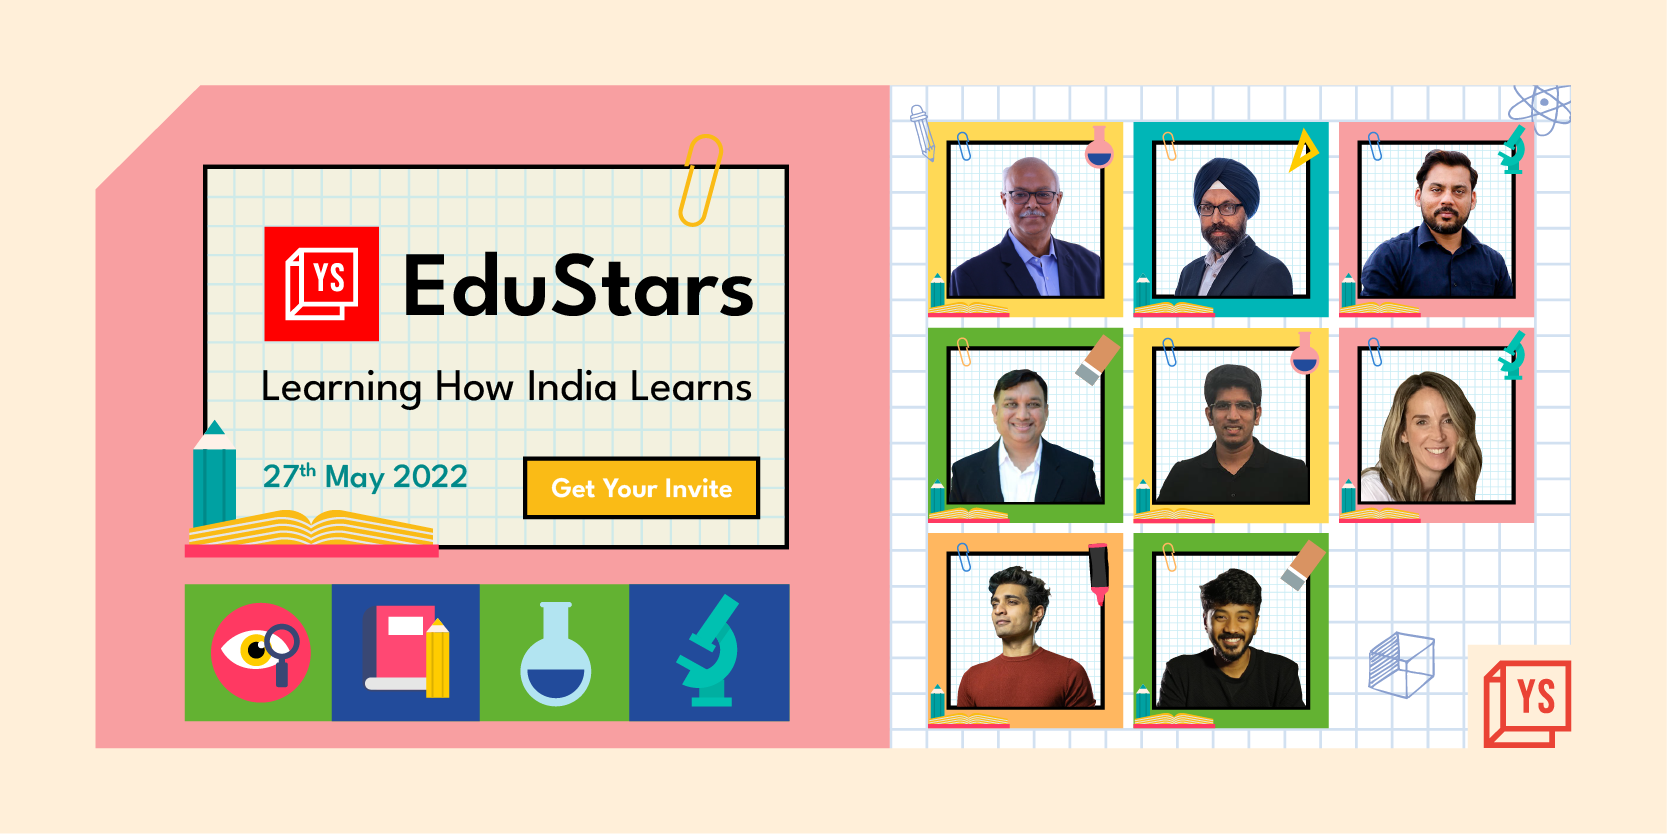 World's youngest historian, future of education, why upskilling is taking centre-stage: Catch all this & more at EduStars 2022 tomorrow